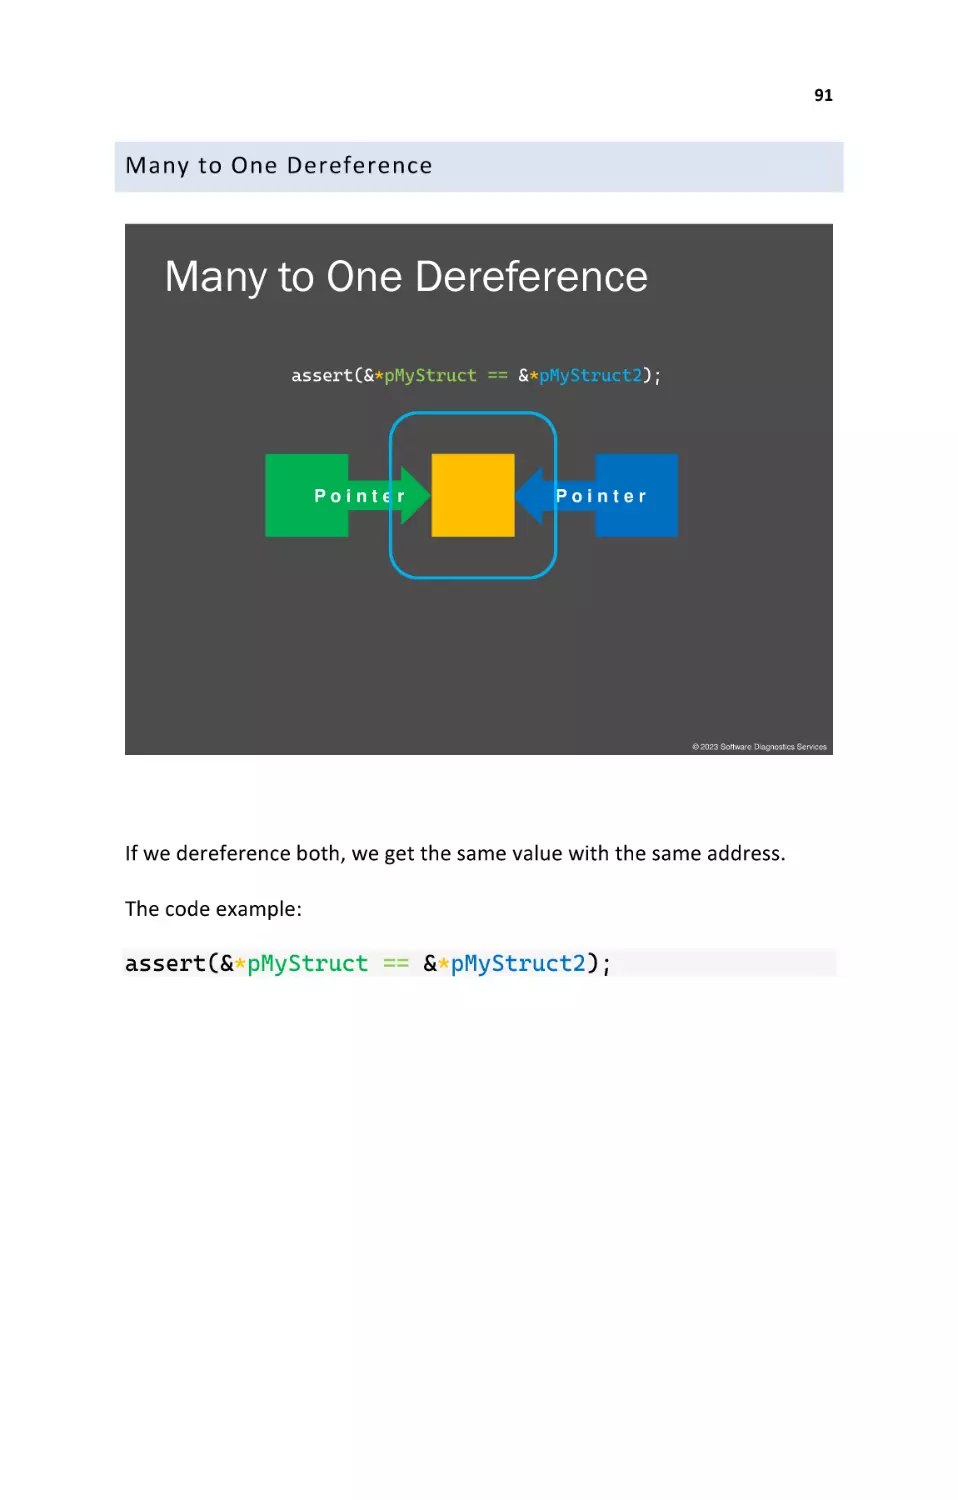 Many to One Dereference